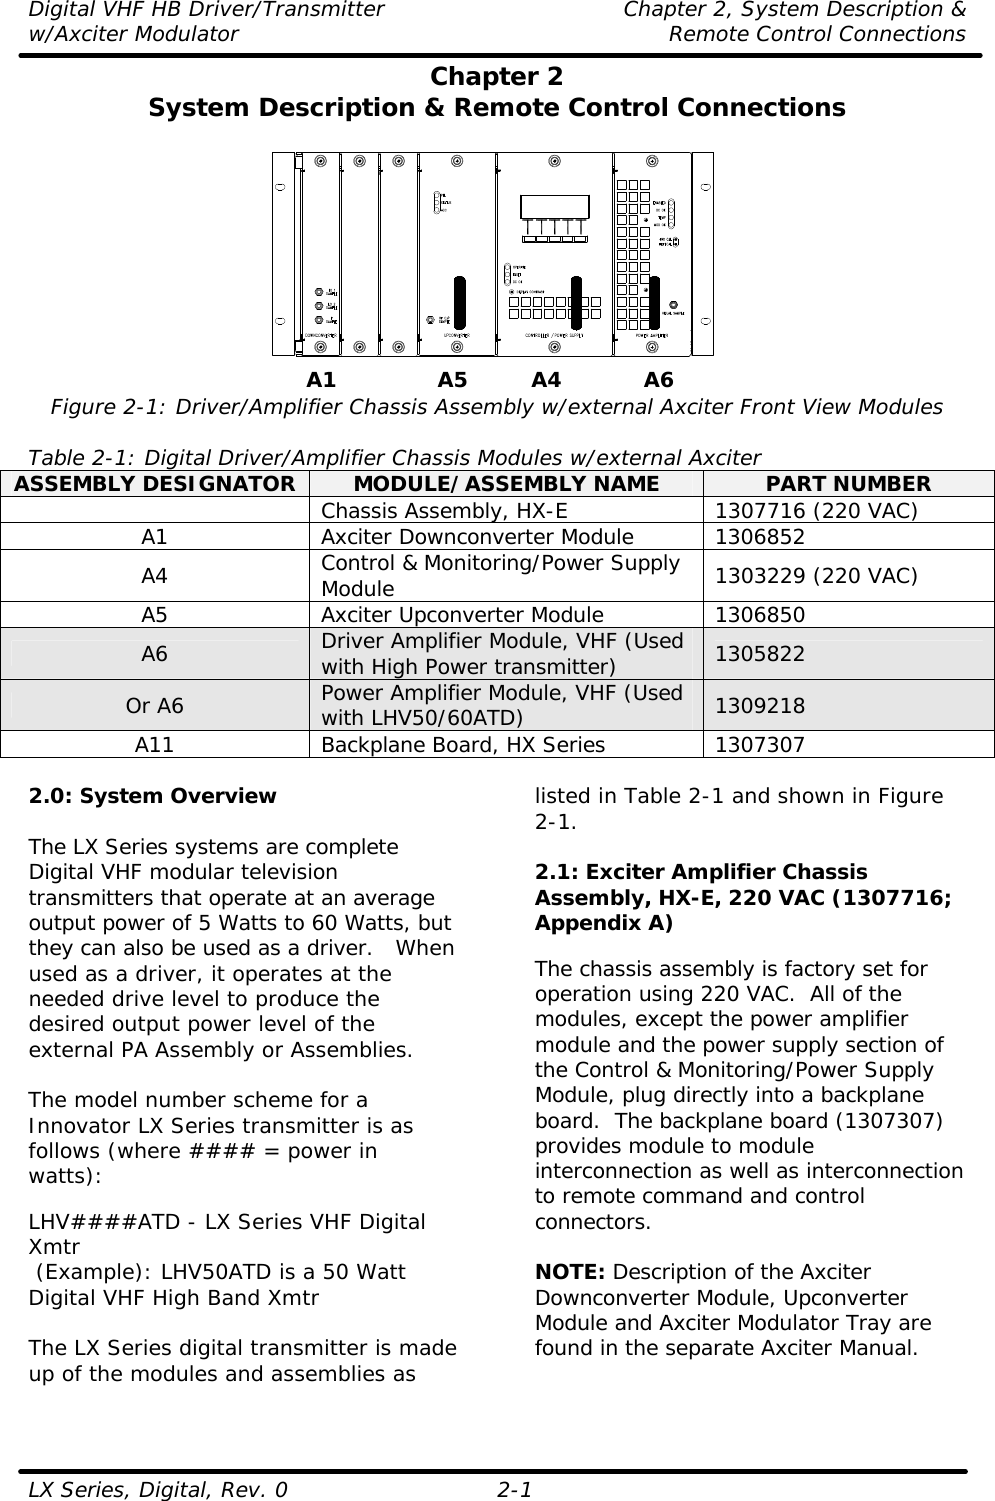 Digital VHF HB Driver/Transmitter Chapter 2, System Description &amp; w/Axciter Modulator Remote Control Connections LX Series, Digital, Rev. 0    2-1 Chapter 2 System Description &amp; Remote Control Connections    Figure 2-1: Driver/Amplifier Chassis Assembly w/external Axciter Front View Modules  Table 2-1: Digital Driver/Amplifier Chassis Modules w/external Axciter ASSEMBLY DESIGNATOR MODULE/ASSEMBLY NAME PART NUMBER  Chassis Assembly, HX-E 1307716 (220 VAC) A1 Axciter Downconverter Module 1306852 A4 Control &amp; Monitoring/Power Supply Module 1303229 (220 VAC) A5 Axciter Upconverter Module 1306850 A6 Driver Amplifier Module, VHF (Used with High Power transmitter) 1305822 Or A6 Power Amplifier Module, VHF (Used with LHV50/60ATD) 1309218 A11 Backplane Board, HX Series 1307307  2.0: System Overview  The LX Series systems are complete Digital VHF modular television transmitters that operate at an average output power of 5 Watts to 60 Watts, but they can also be used as a driver.   When used as a driver, it operates at the needed drive level to produce the desired output power level of the external PA Assembly or Assemblies.  The model number scheme for a Innovator LX Series transmitter is as follows (where #### = power in watts):   LHV####ATD - LX Series VHF Digital Xmtr  (Example): LHV50ATD is a 50 Watt Digital VHF High Band Xmtr  The LX Series digital transmitter is made up of the modules and assemblies as listed in Table 2-1 and shown in Figure 2-1.  2.1: Exciter Amplifier Chassis Assembly, HX-E, 220 VAC (1307716; Appendix A)  The chassis assembly is factory set for operation using 220 VAC.  All of the modules, except the power amplifier module and the power supply section of the Control &amp; Monitoring/Power Supply Module, plug directly into a backplane board.  The backplane board (1307307) provides module to module interconnection as well as interconnection to remote command and control connectors.  NOTE: Description of the Axciter Downconverter Module, Upconverter Module and Axciter Modulator Tray are found in the separate Axciter Manual. A1A5A4A6